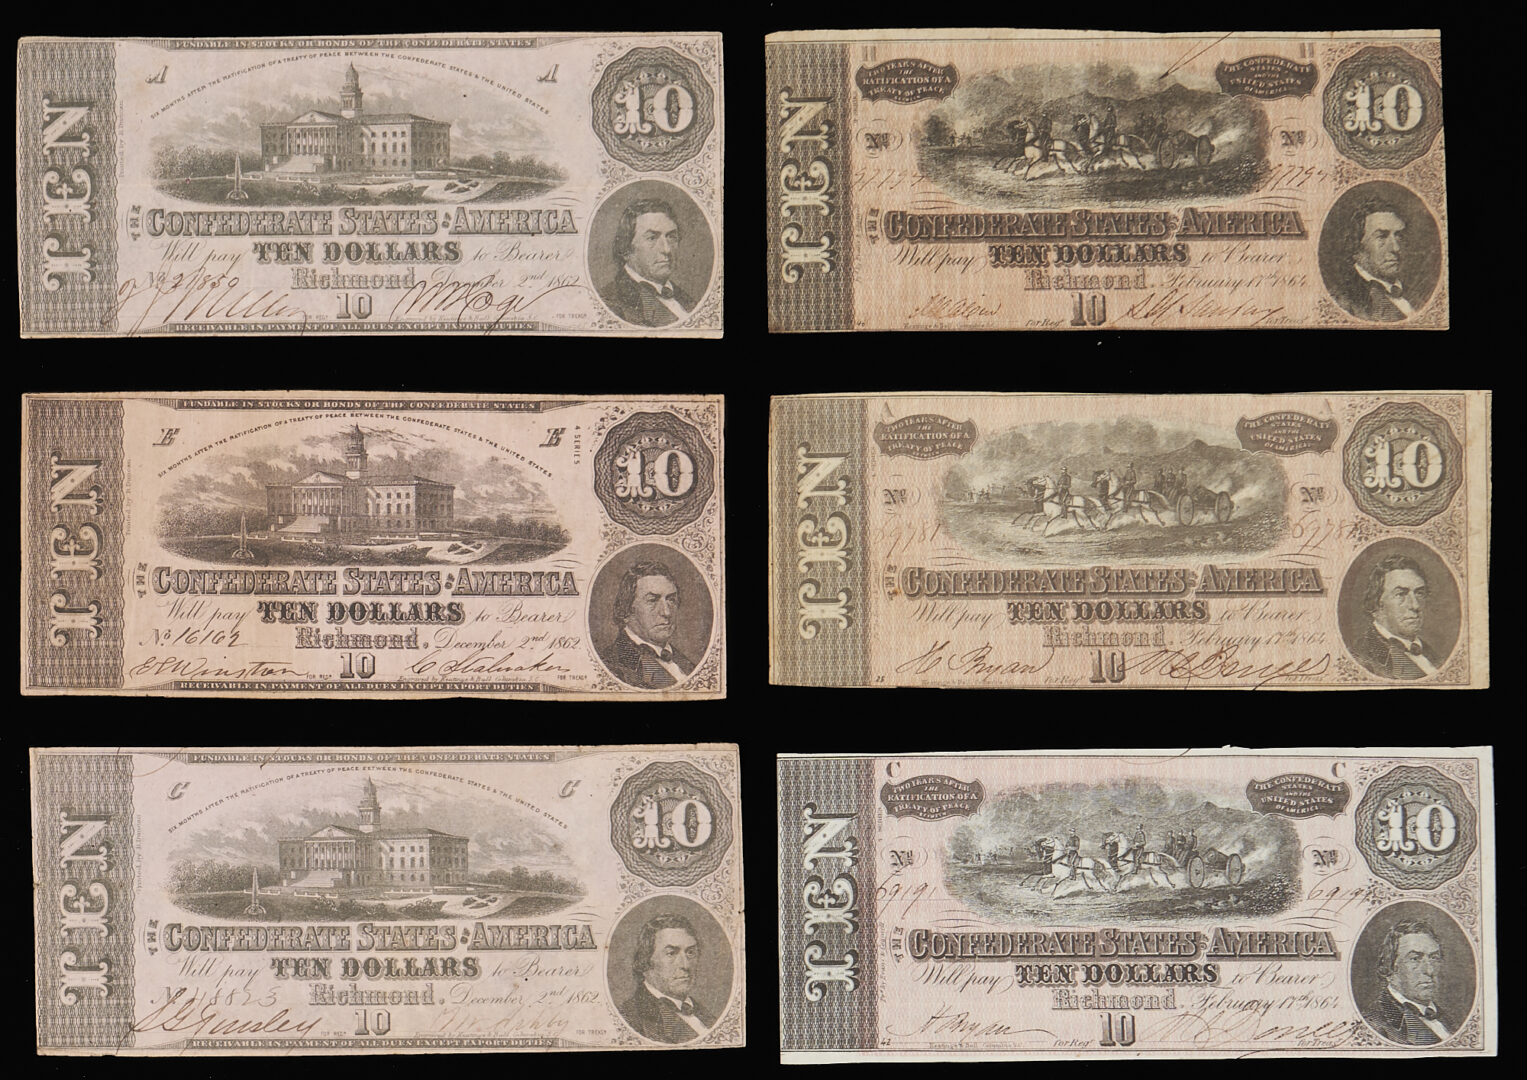 Lot 596: 19 Confederate States Obsolete Currency Notes w/ Pink Overprint